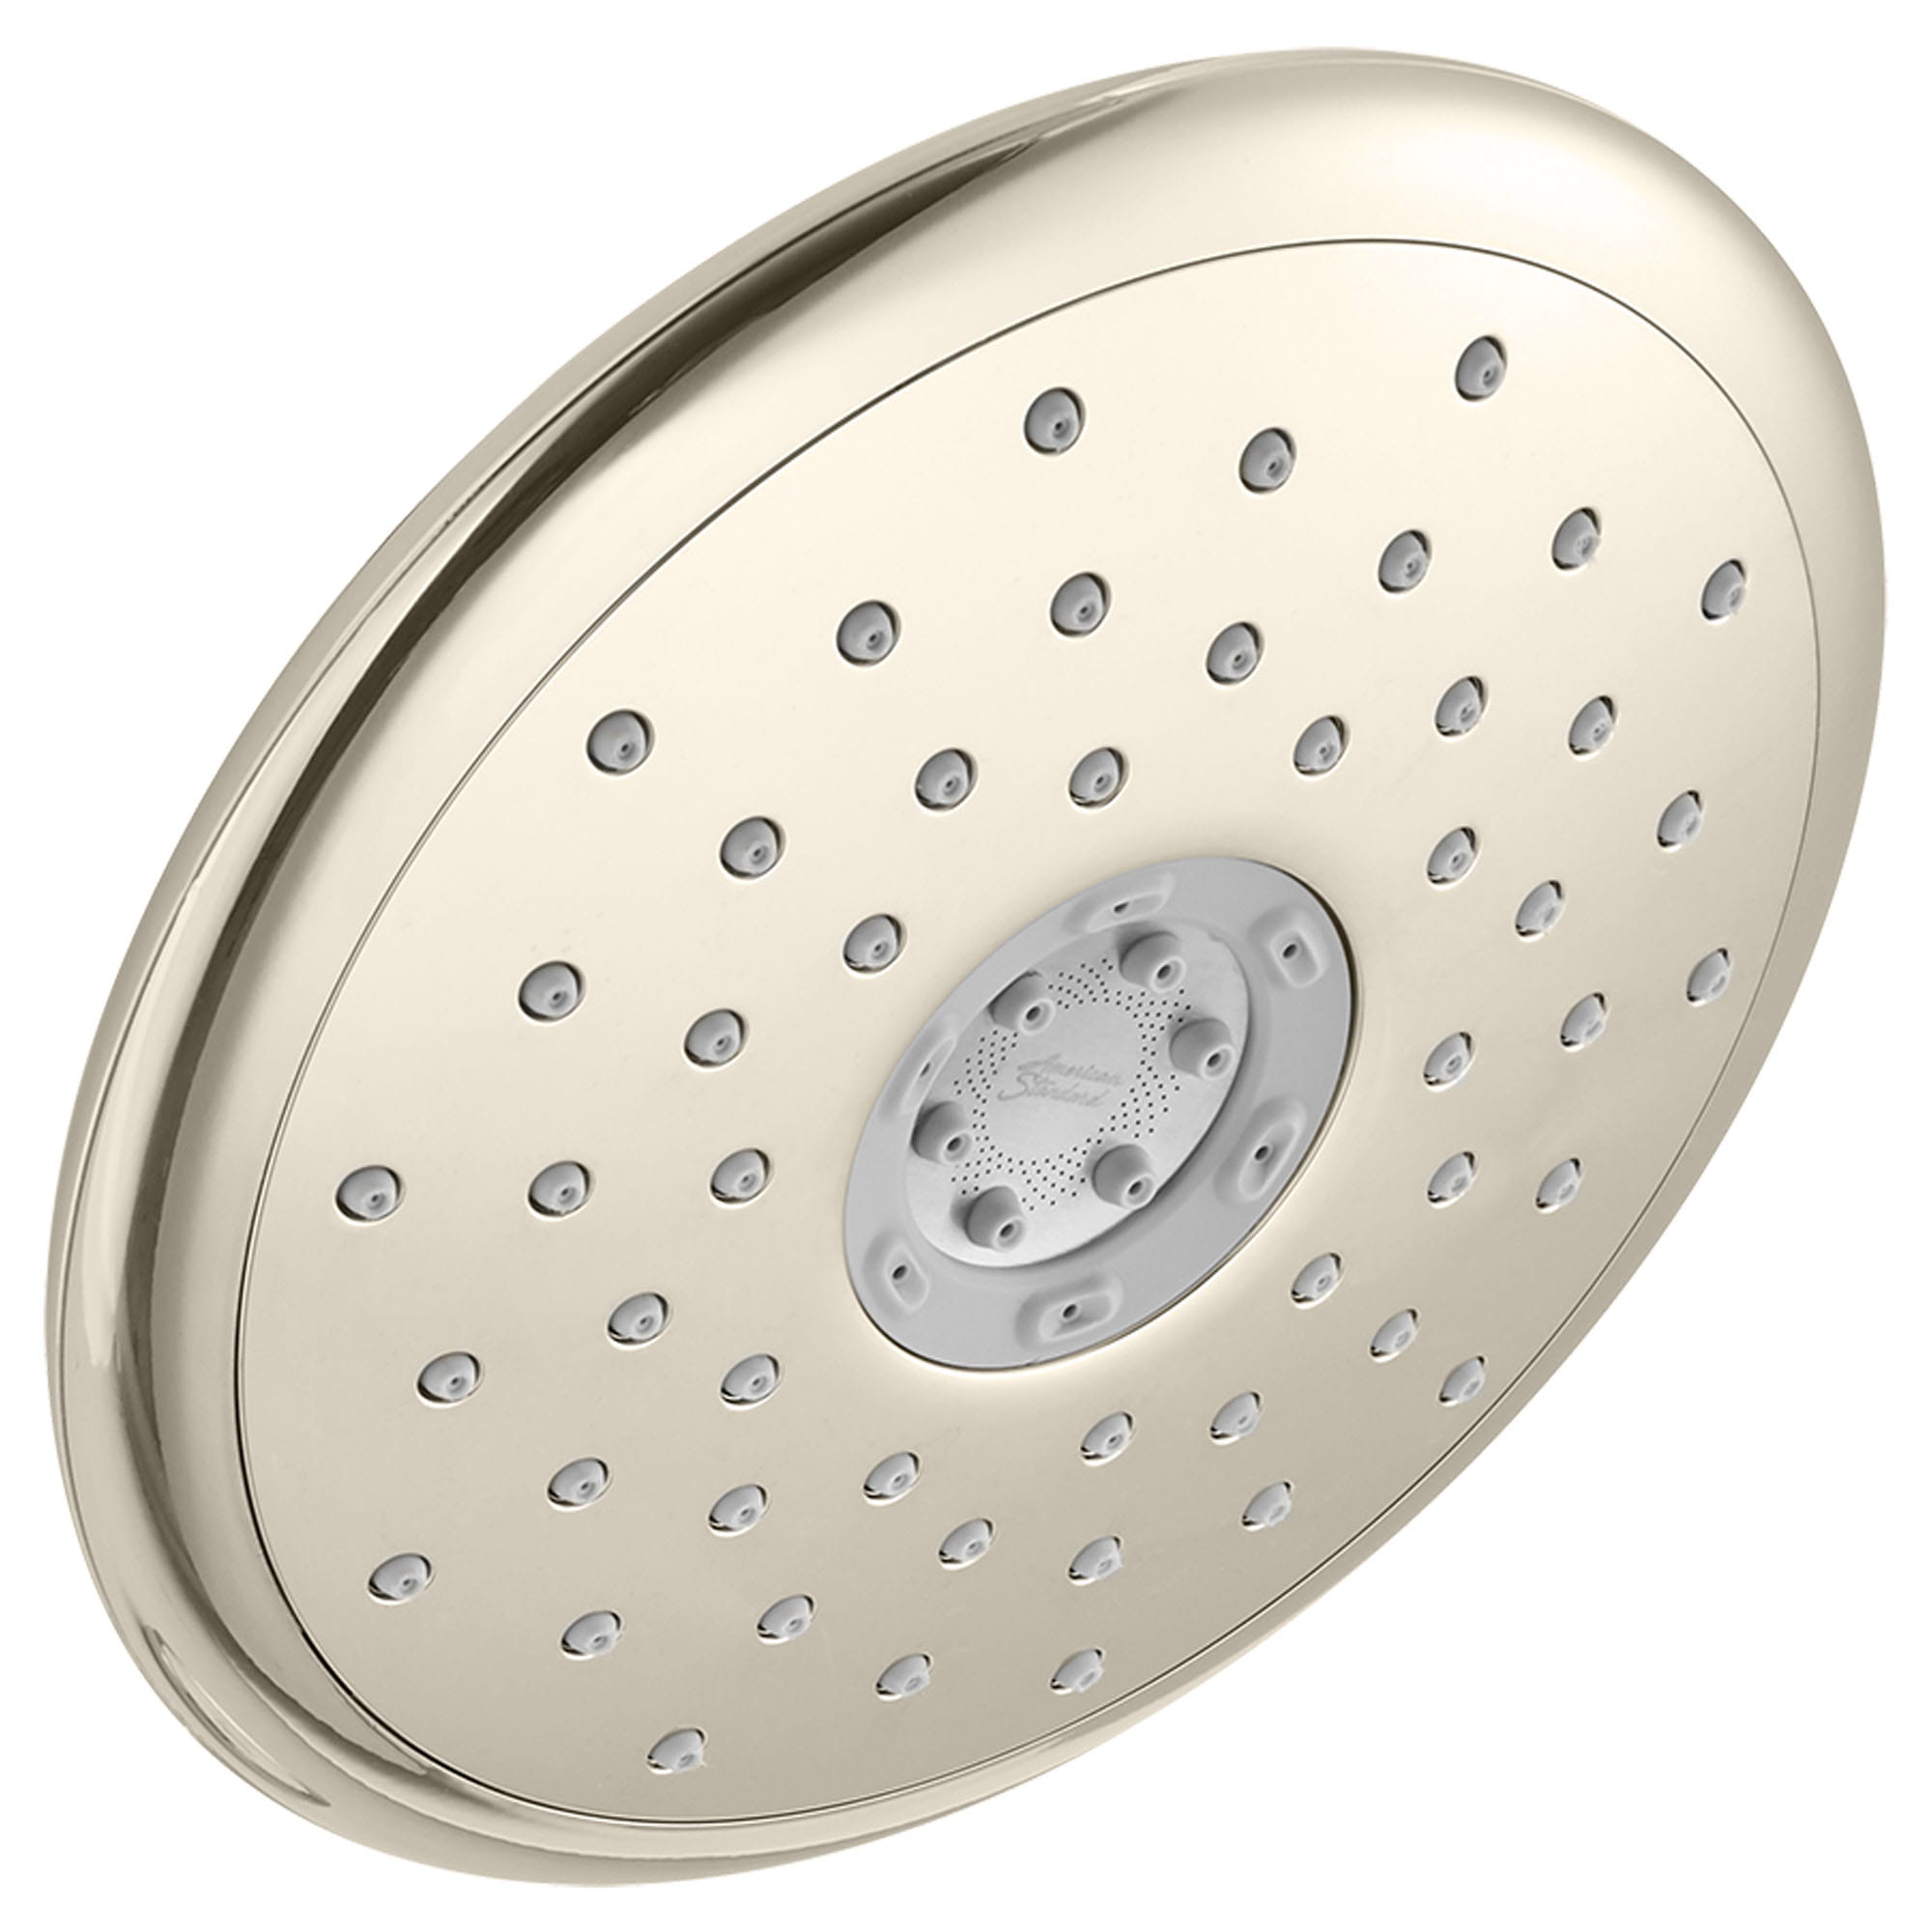 Spectra® Touch 7-Inch 2.5 gpm/9.5 L/min Fixed Showerhead